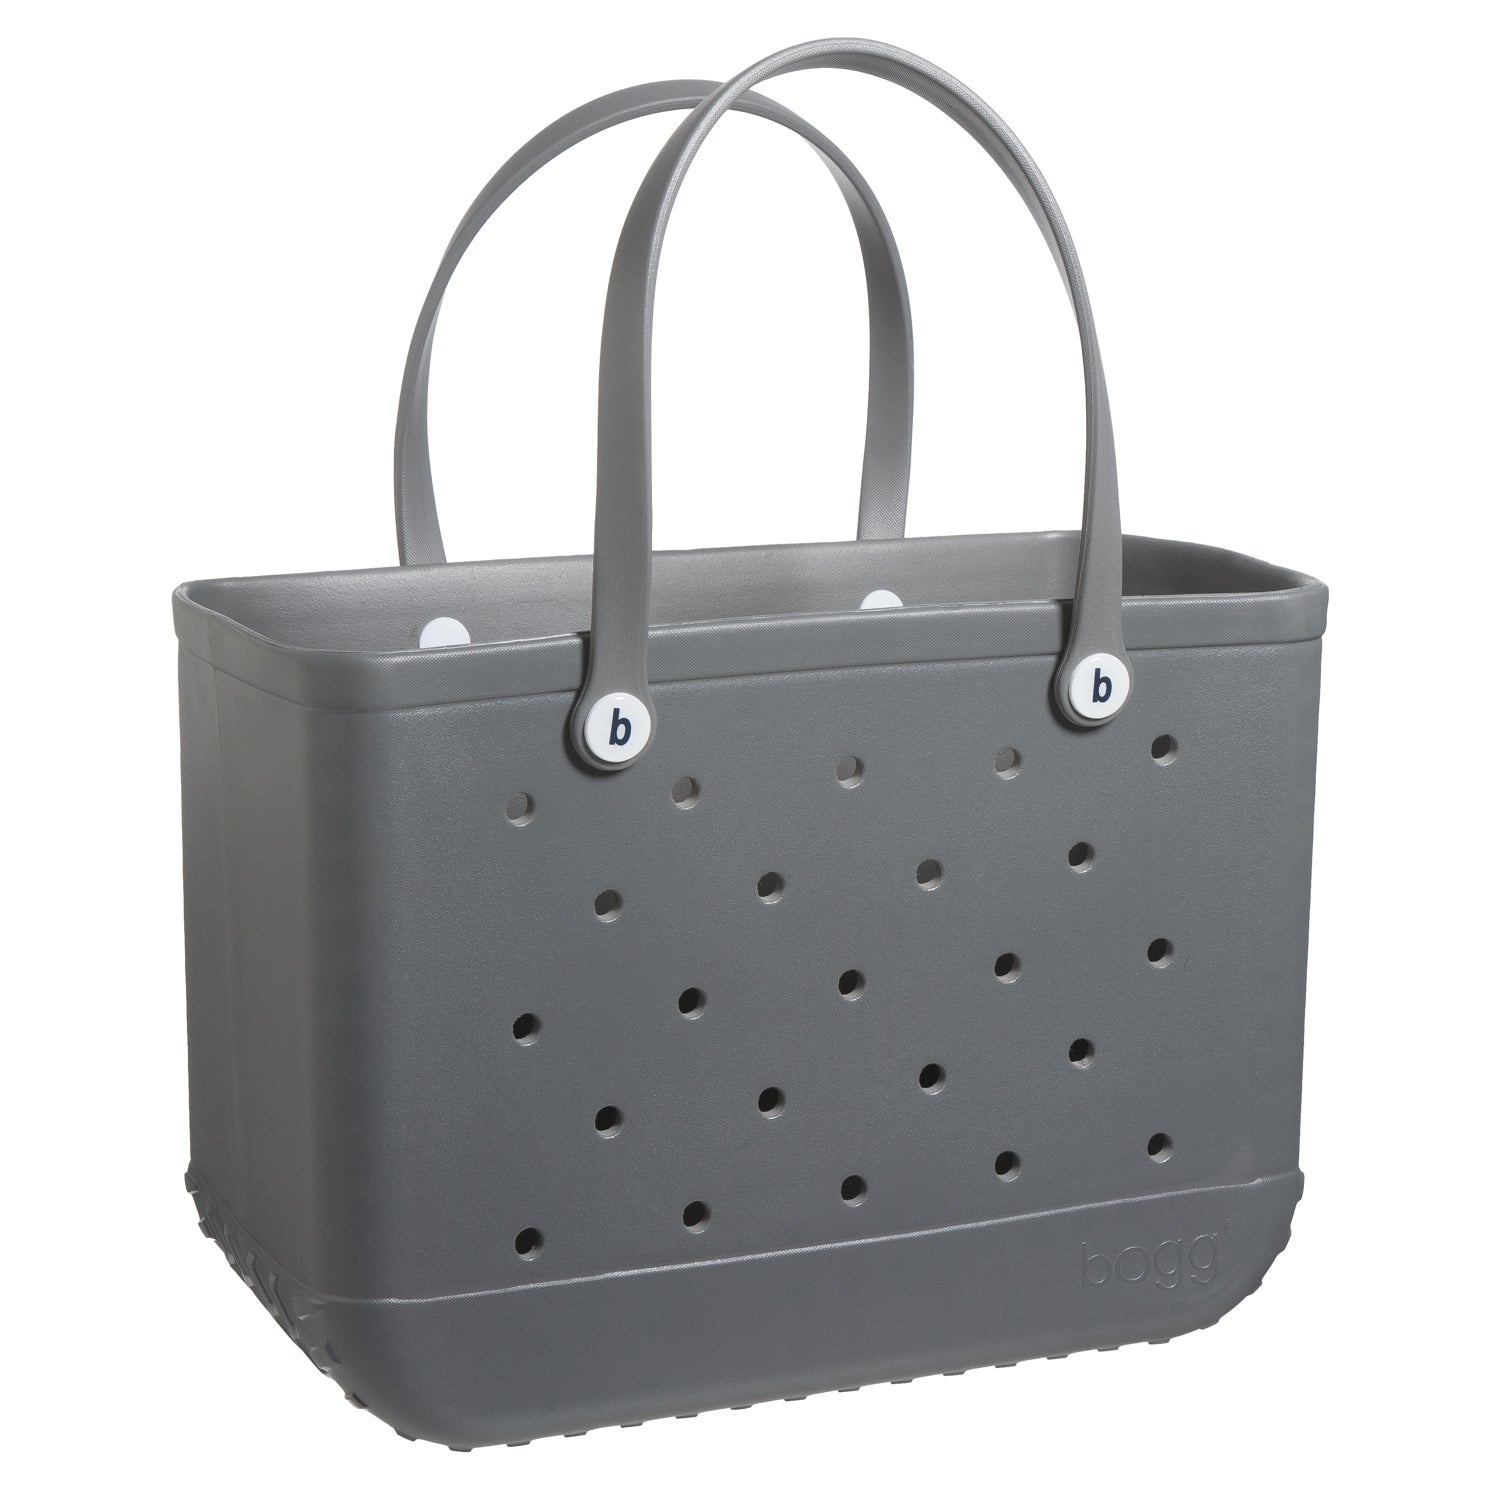 gray bogg bag on a white background